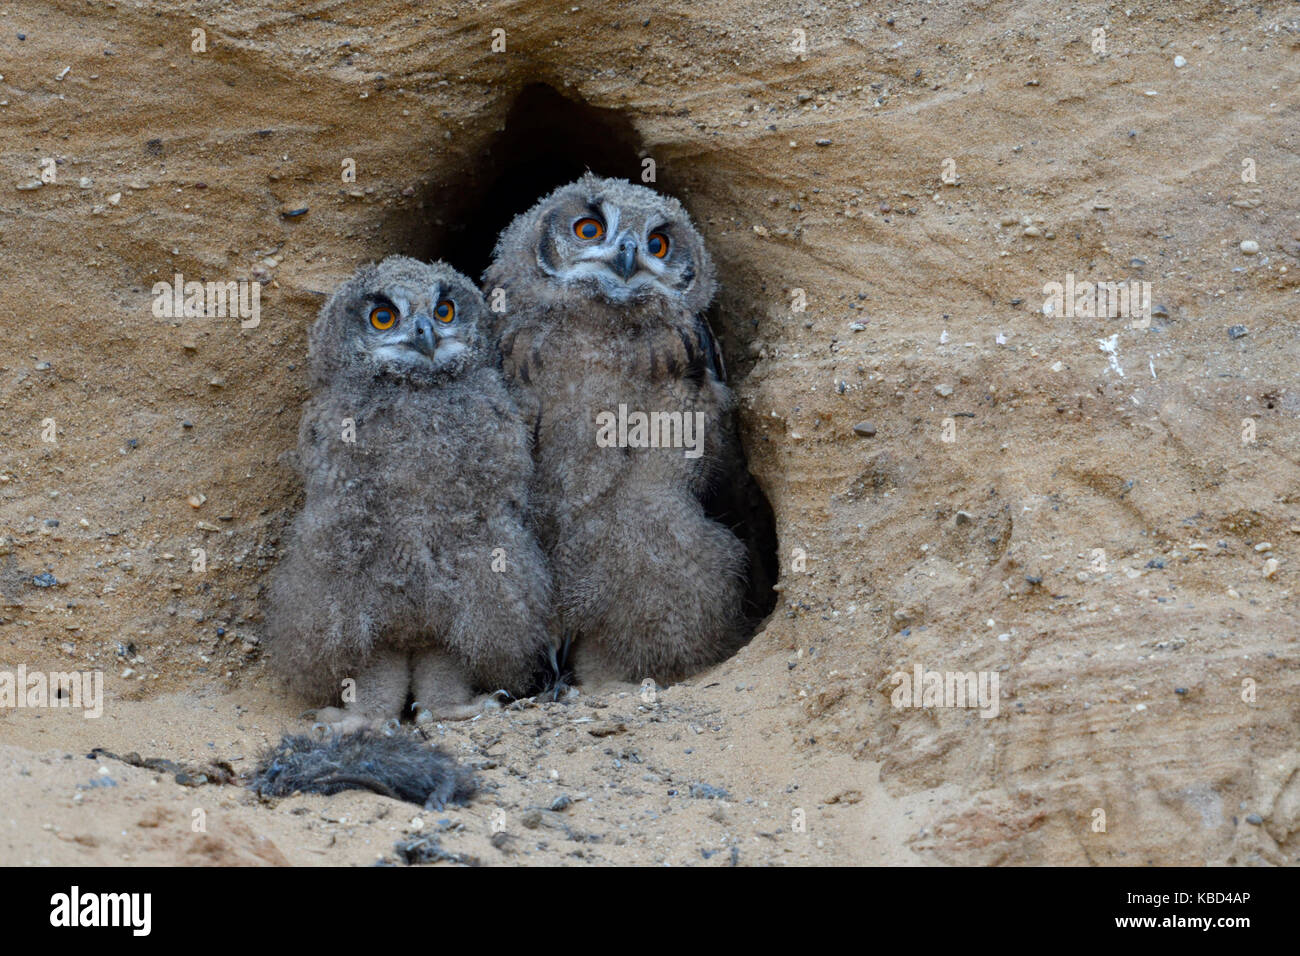 Eurasian Eagle Owls / Europaeische Uhus ( Bubo bubo ), grown up chicks, standing close together at the entrance of their nest burrow, funny, wildlife. Stock Photo